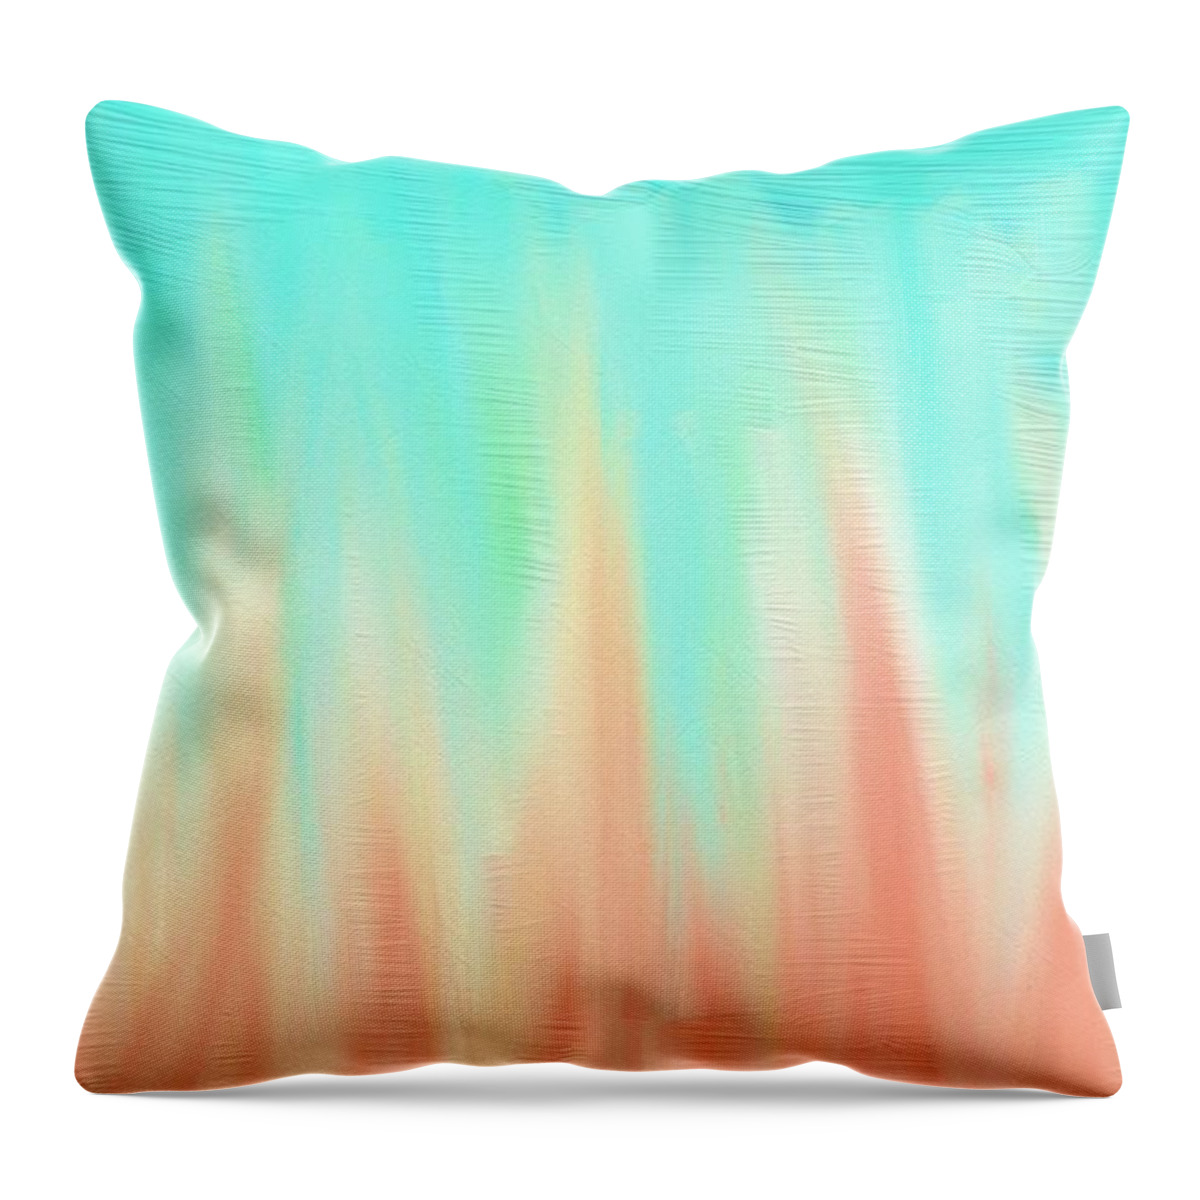 Fire Throw Pillow featuring the painting Bright Flame by Naomi Jacobs